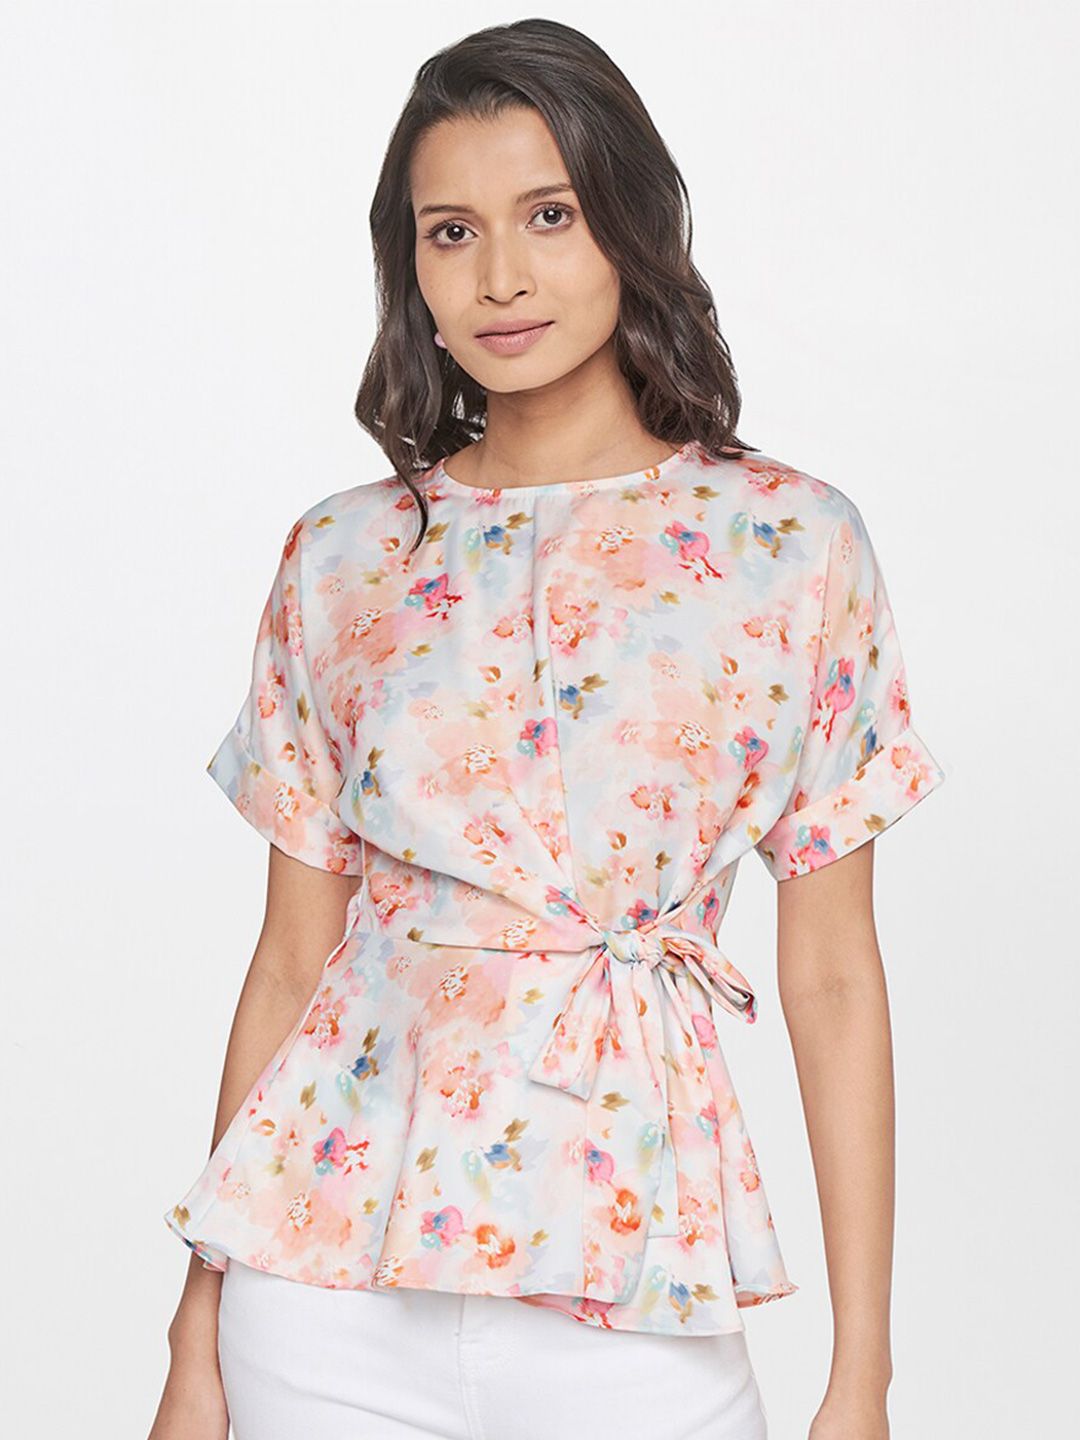 AND Peach-Coloured Floral Print Shirt Style Top Price in India